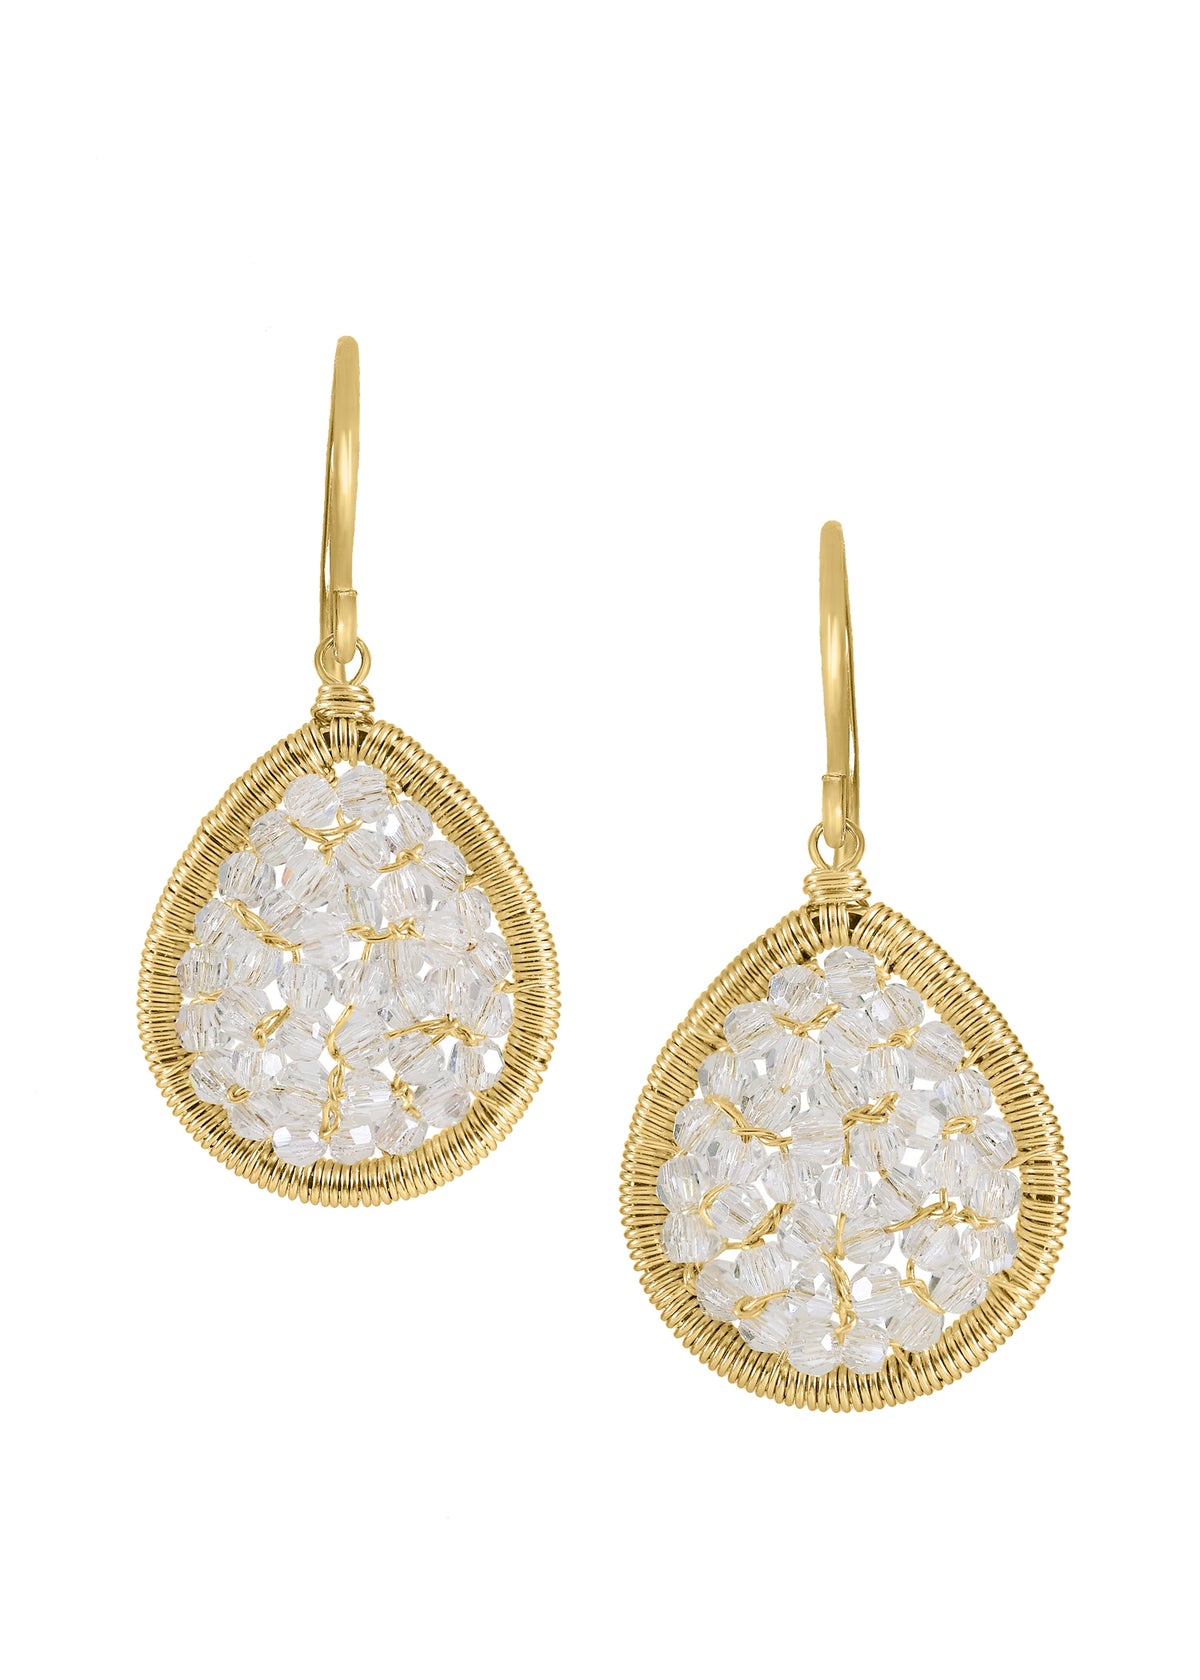 Crystal 14k gold fill Earrings measure 1-1/16&quot; in length (including the ear wires) and 1/2&quot; in width at the widest point Handmade in our Los Angeles studio